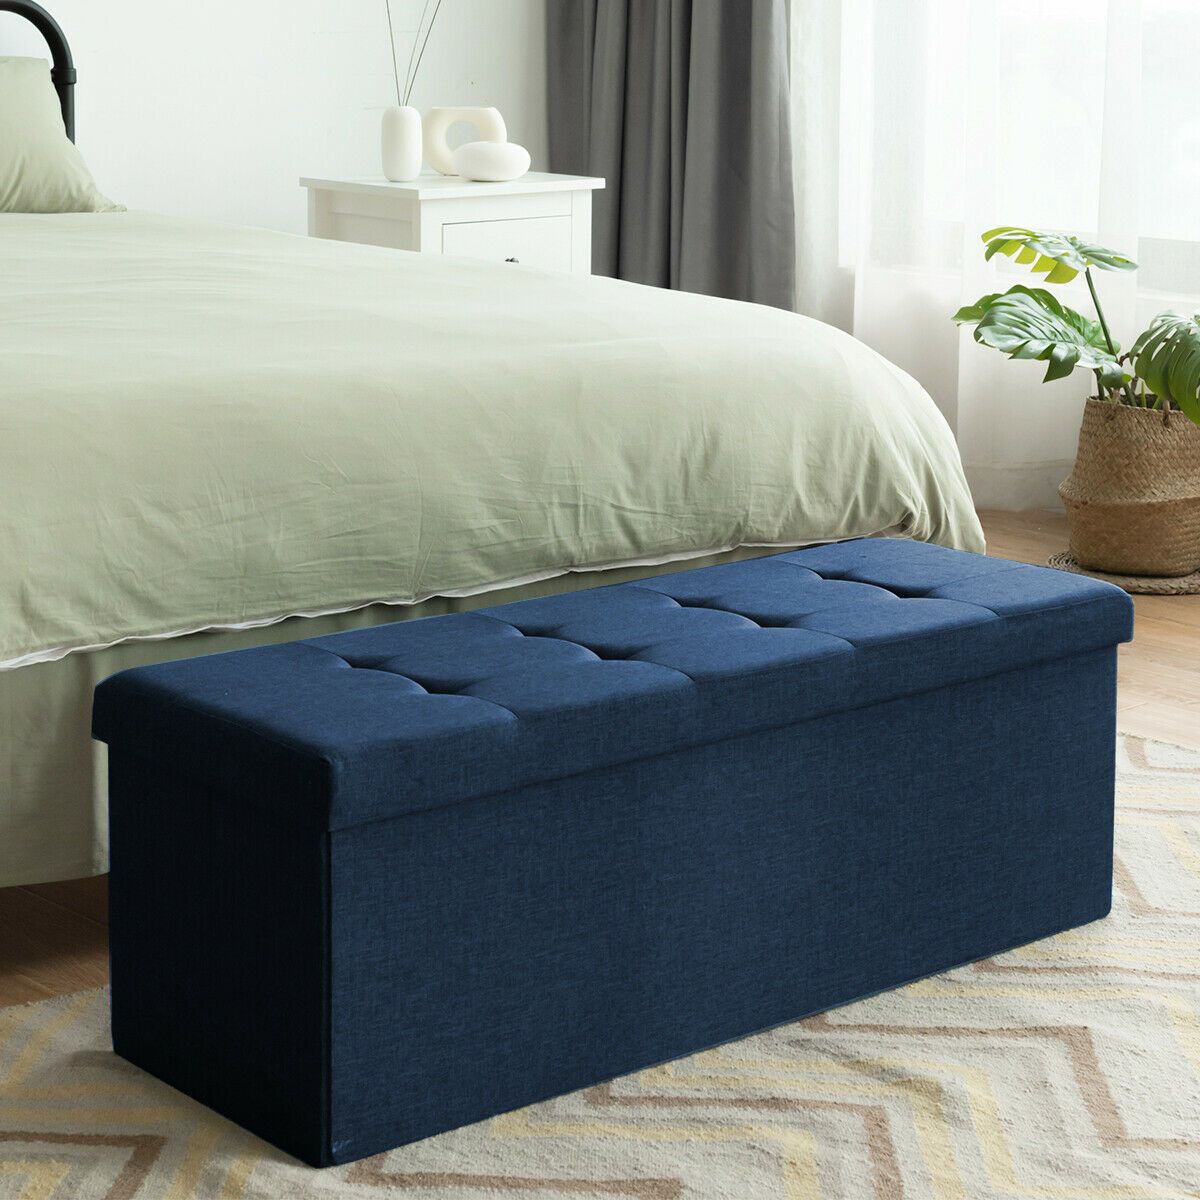 Folding Storage Ottoman Bench with Lid for Hallway or Bedroom - Navy